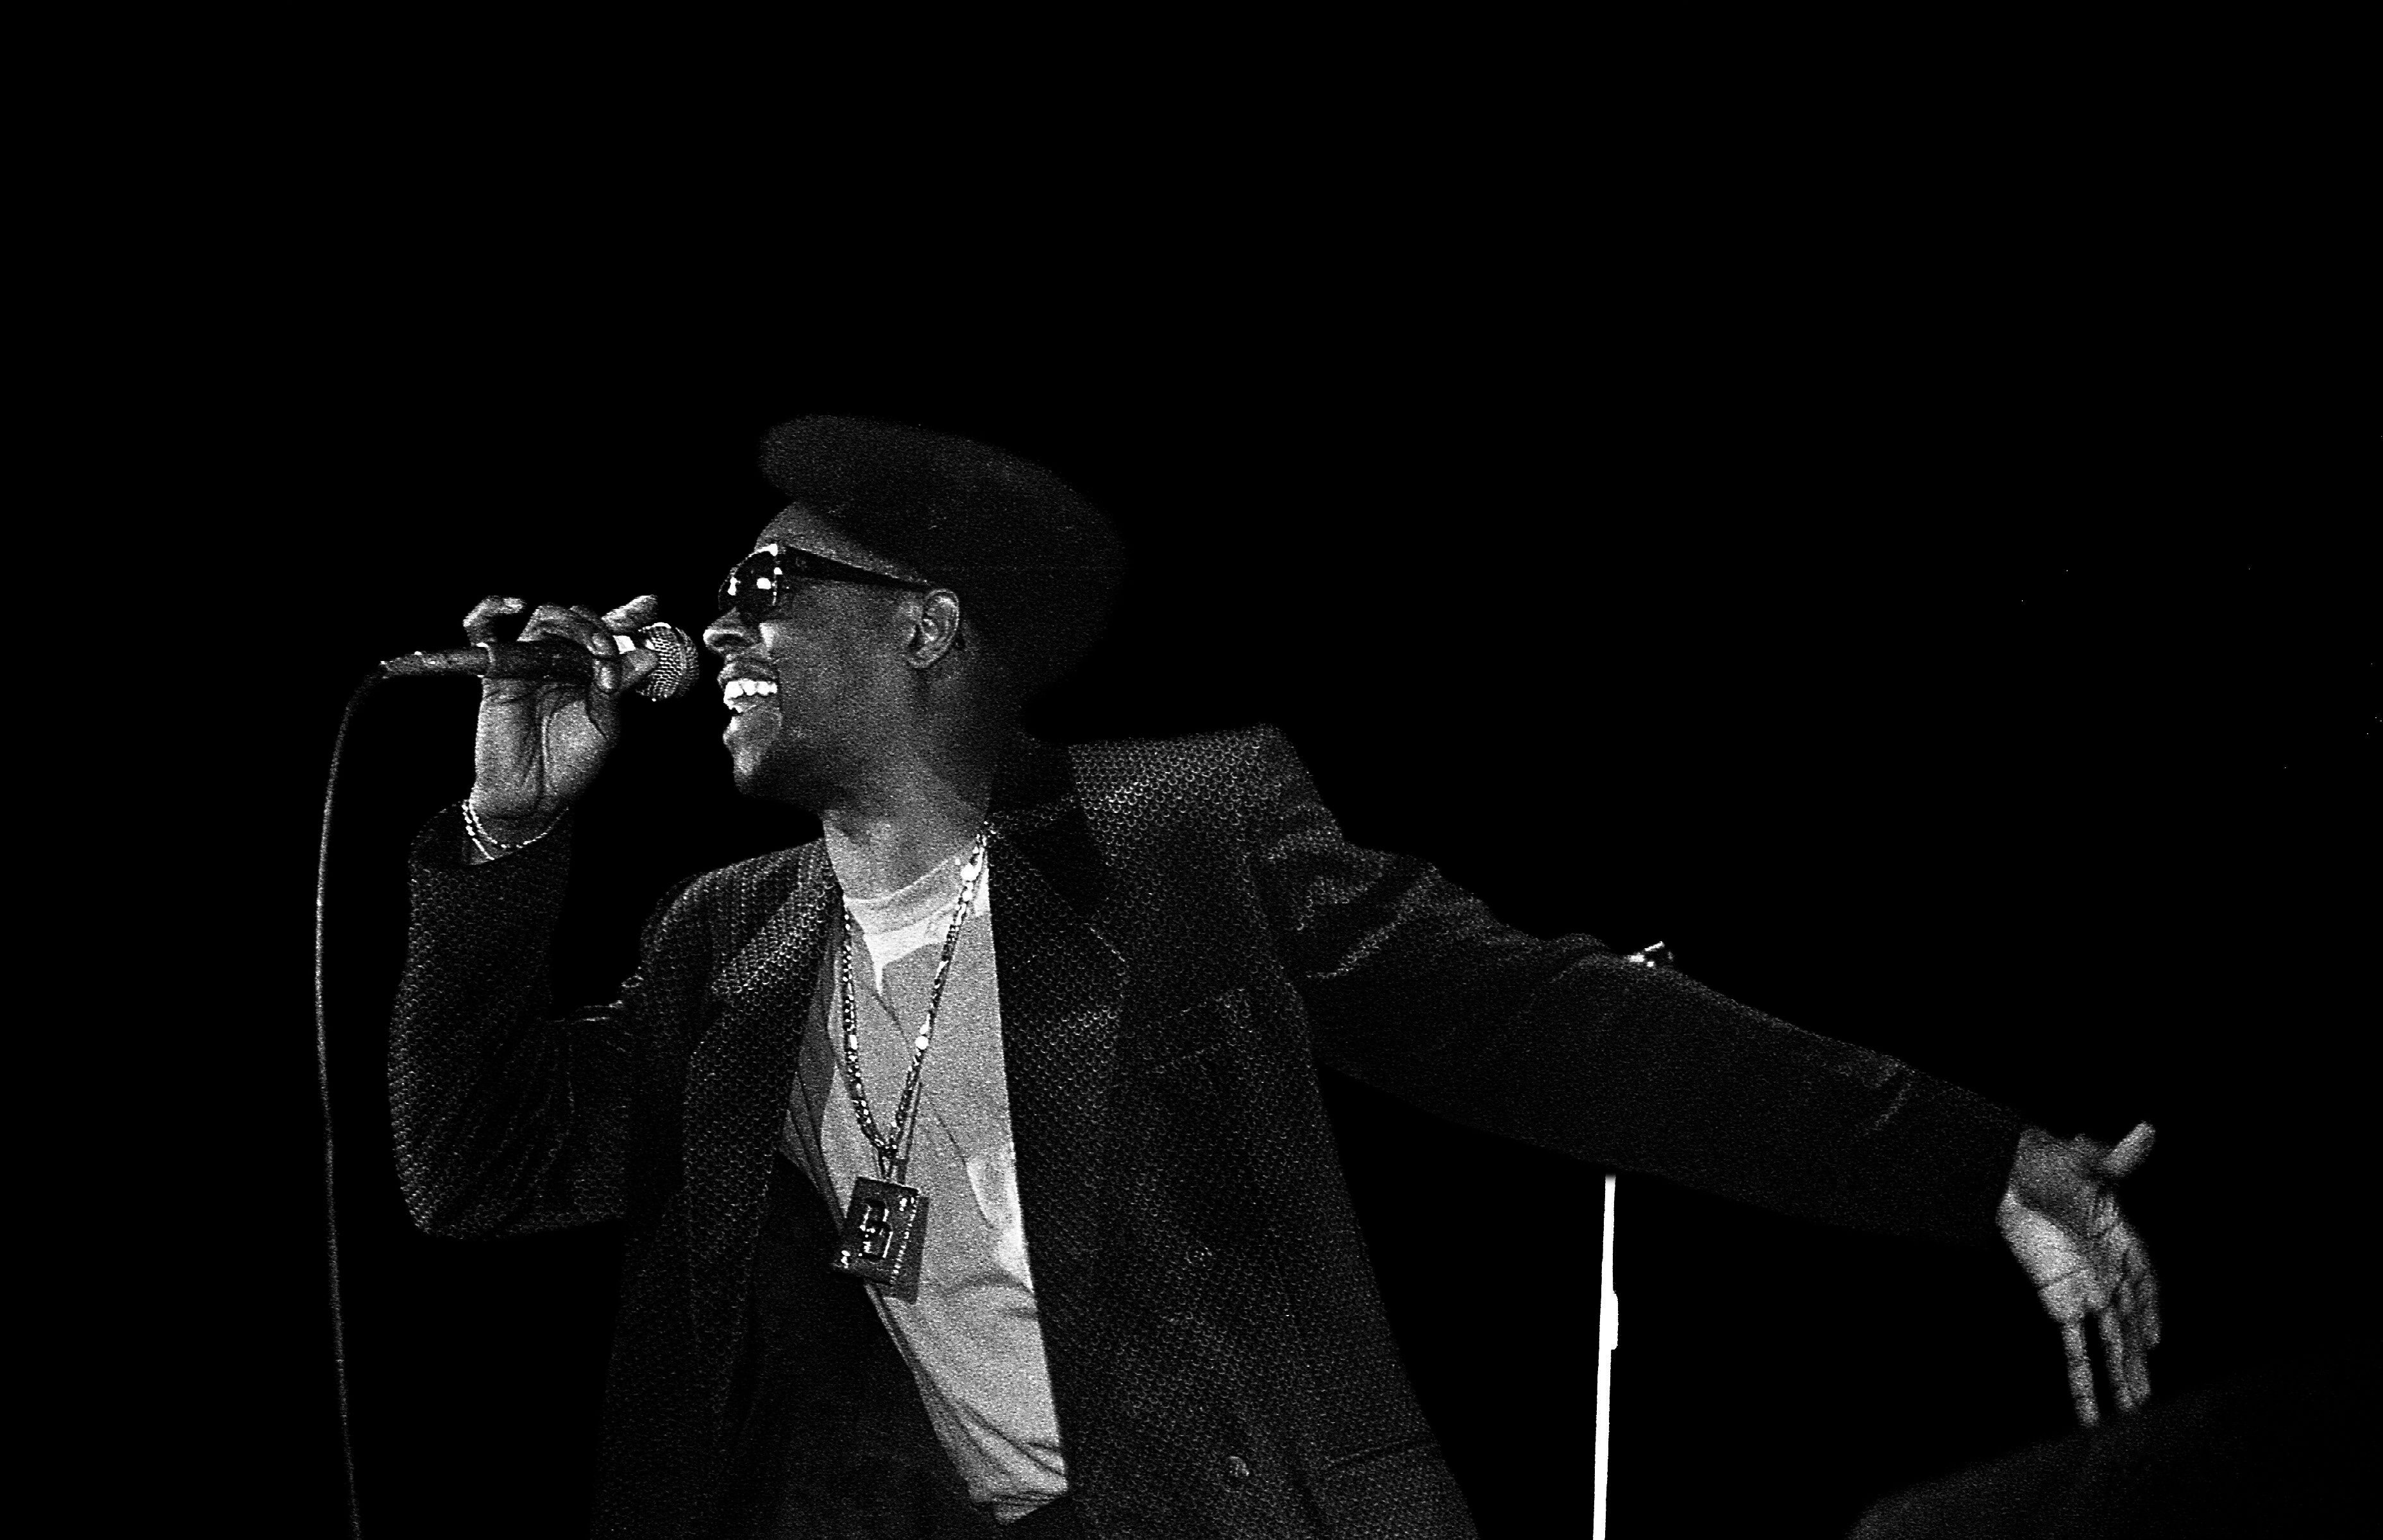 Rapper Dana Dane performs at the Regal Theater in Chicago, Illinois in March 1988. Credit: Raymond Boyd/Getty Images